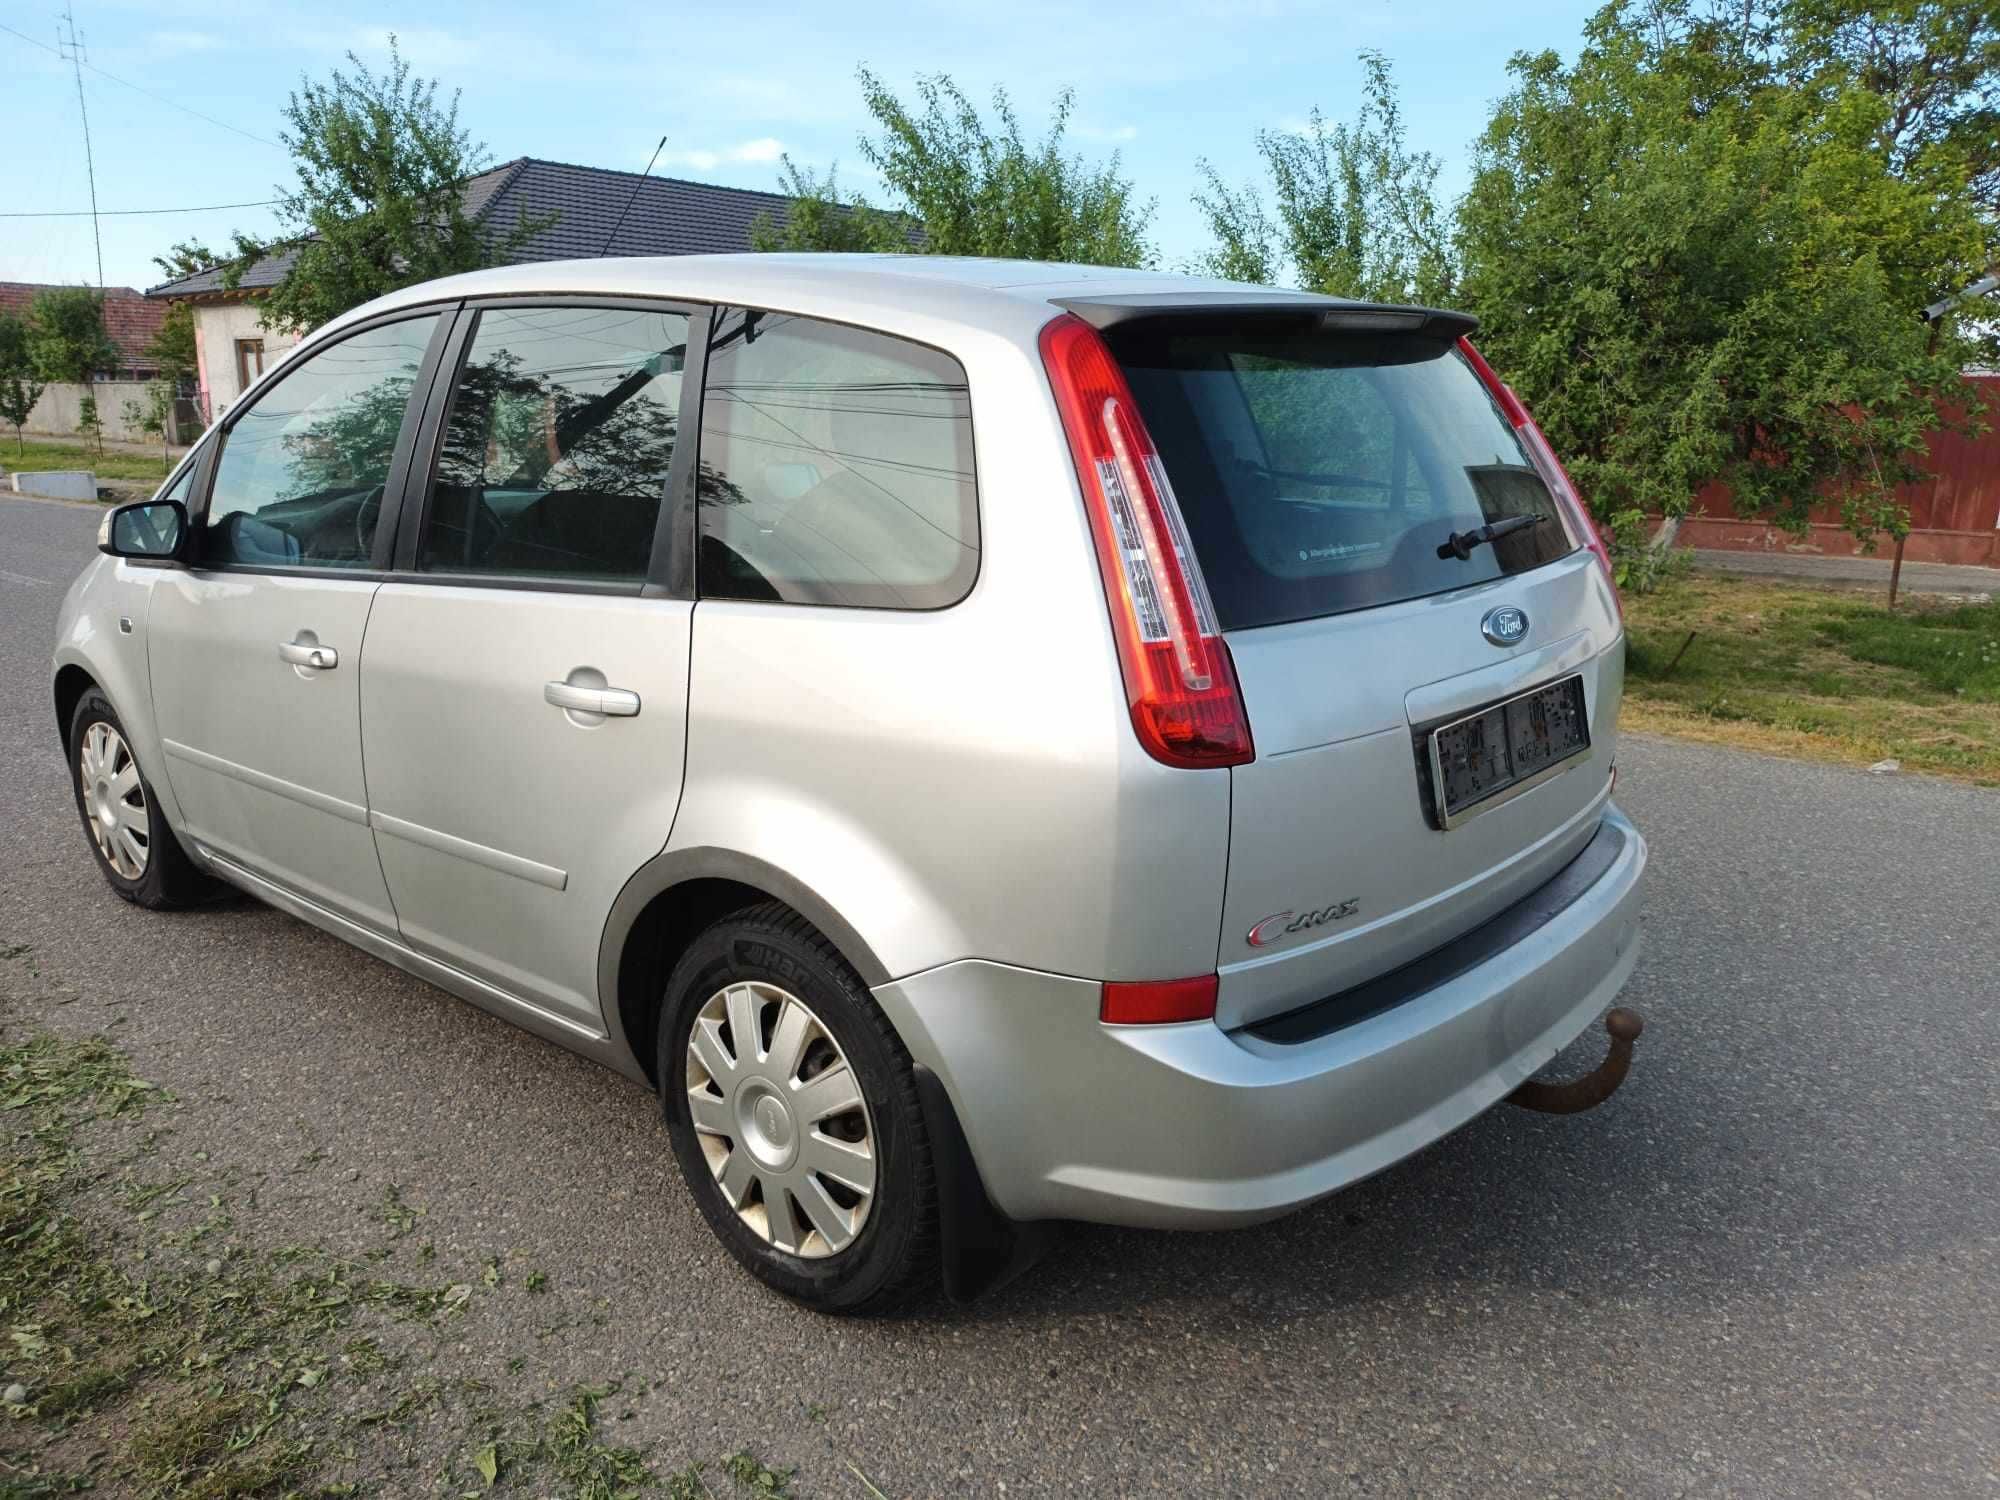 Ford C Max 1.6 TDCi 90 Cp 2008